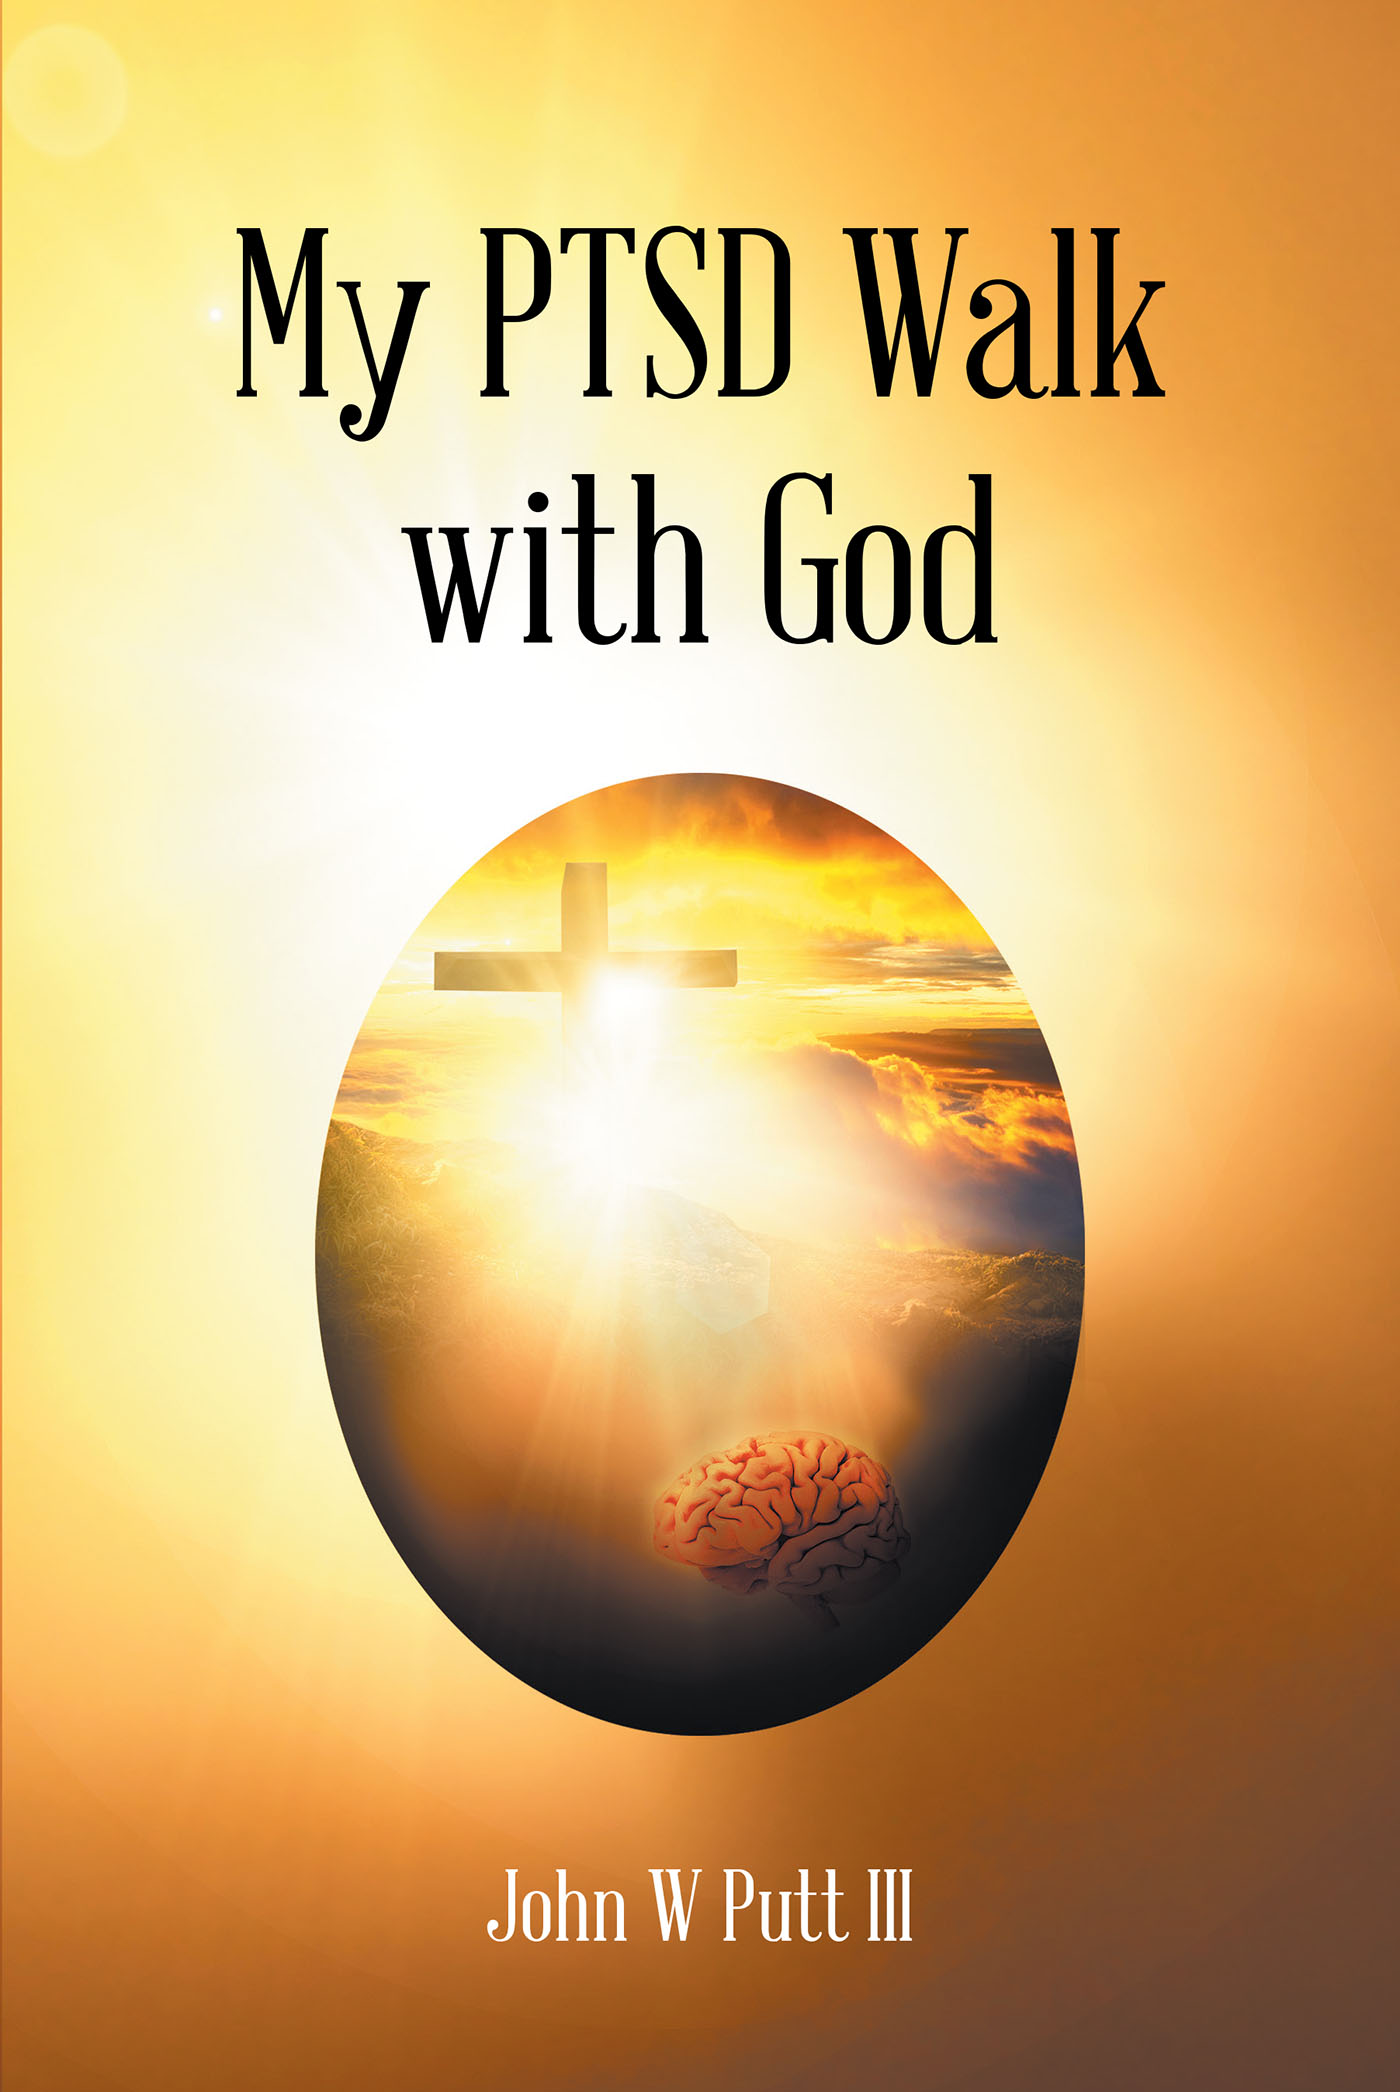 John W Putt III’s Newly Released “My PTSD Walk with God” is a Powerful Memoir That Brings a Soldier’s Struggles to Light